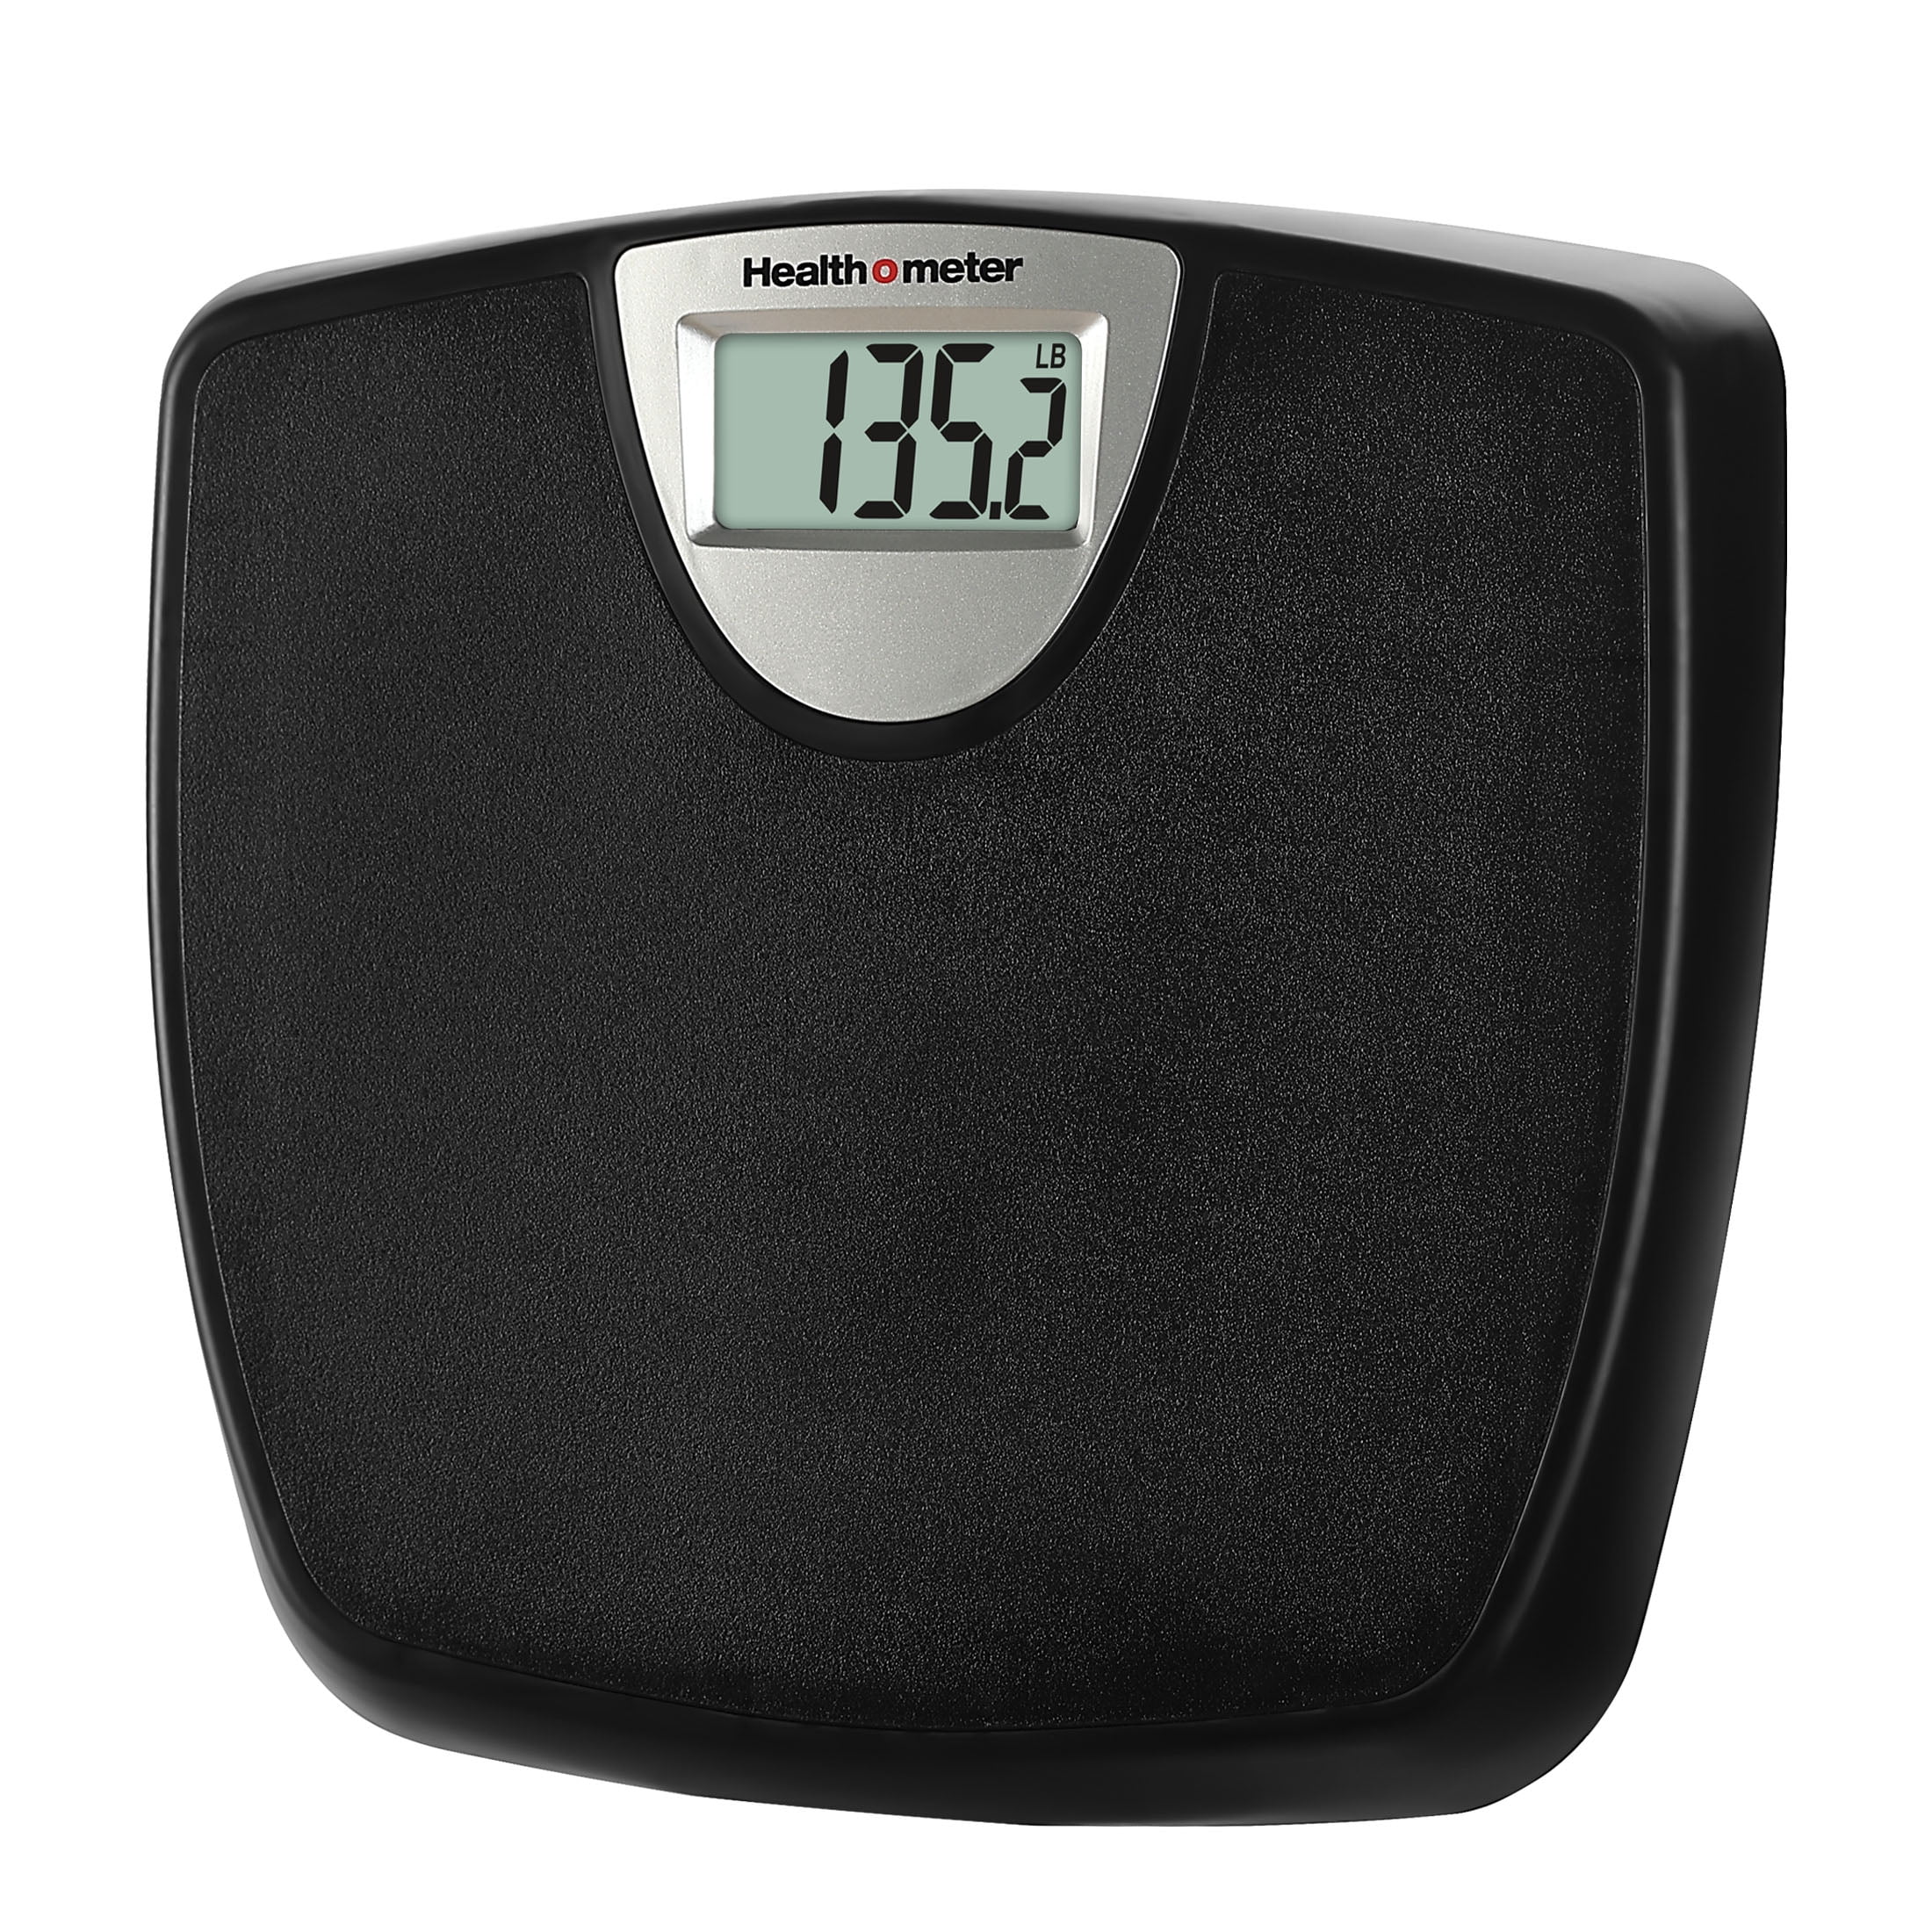 Ktaxon Bathroom Weight Scale, Highly Accurate Digital Bathroom Body Scale,  Measures Weight up to 180kg/396 lbs., Black